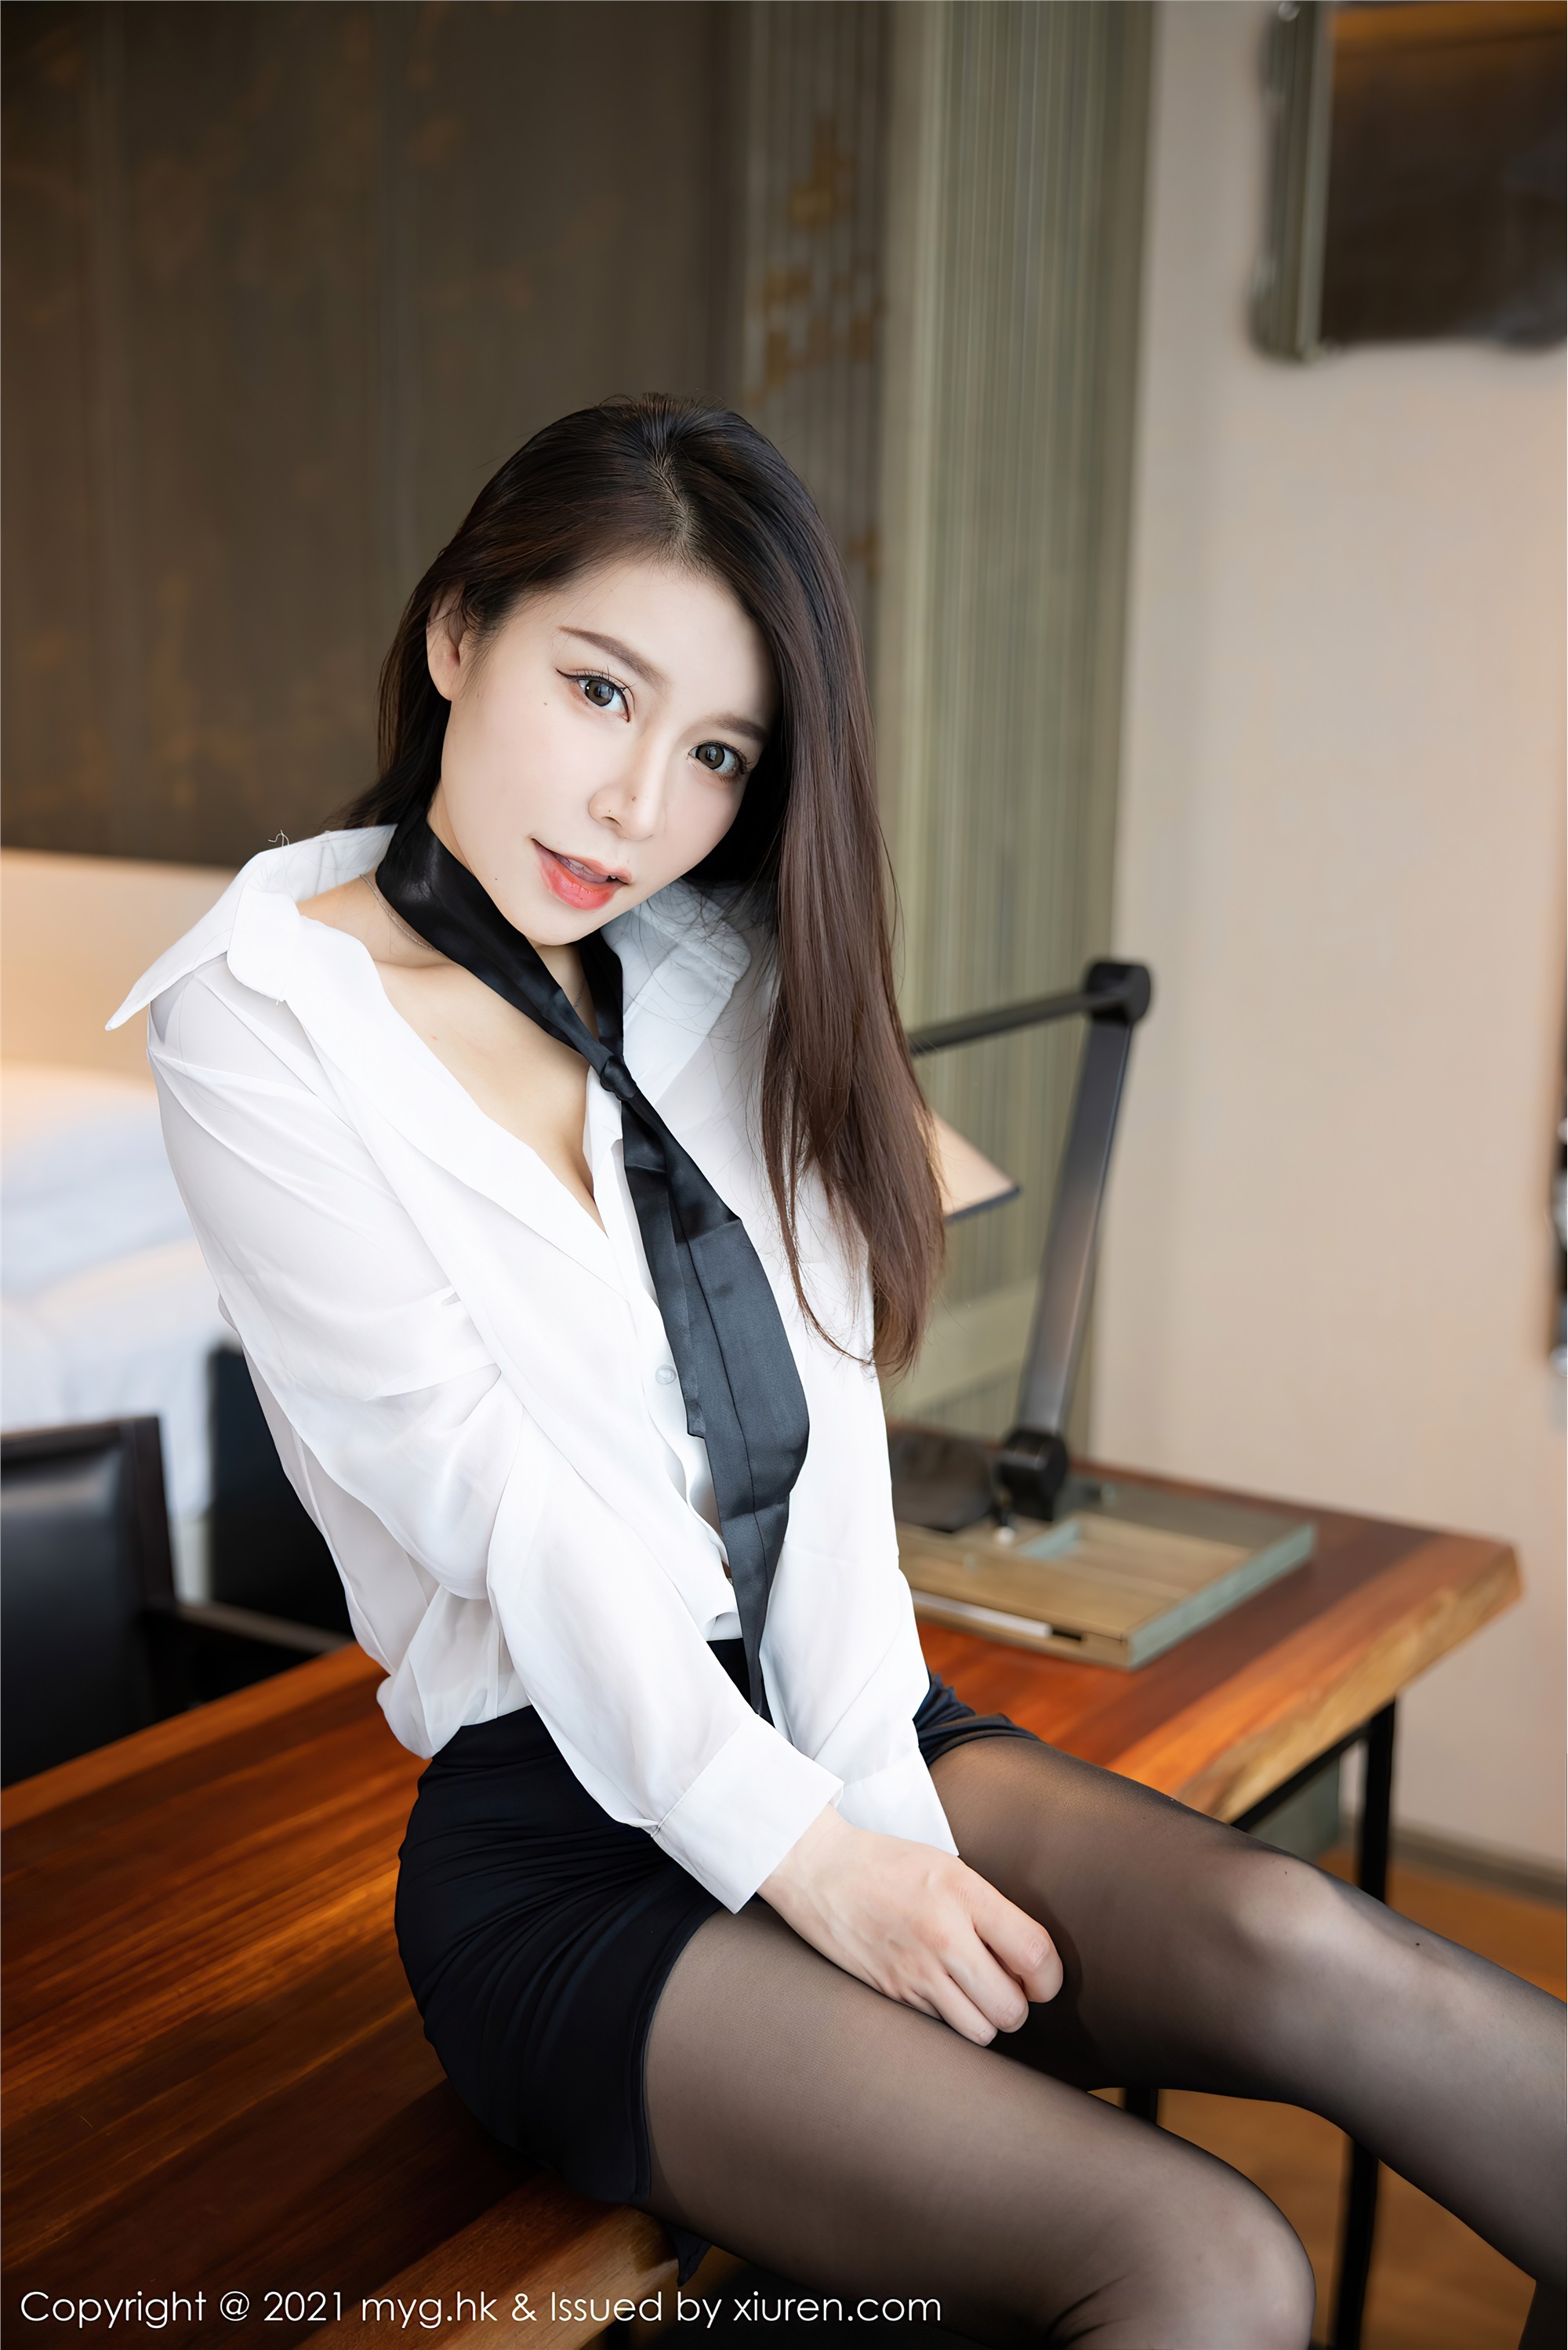 MyGirl Beauty museum 2021.08.02 Vol.565 Vetiver Jia Baby